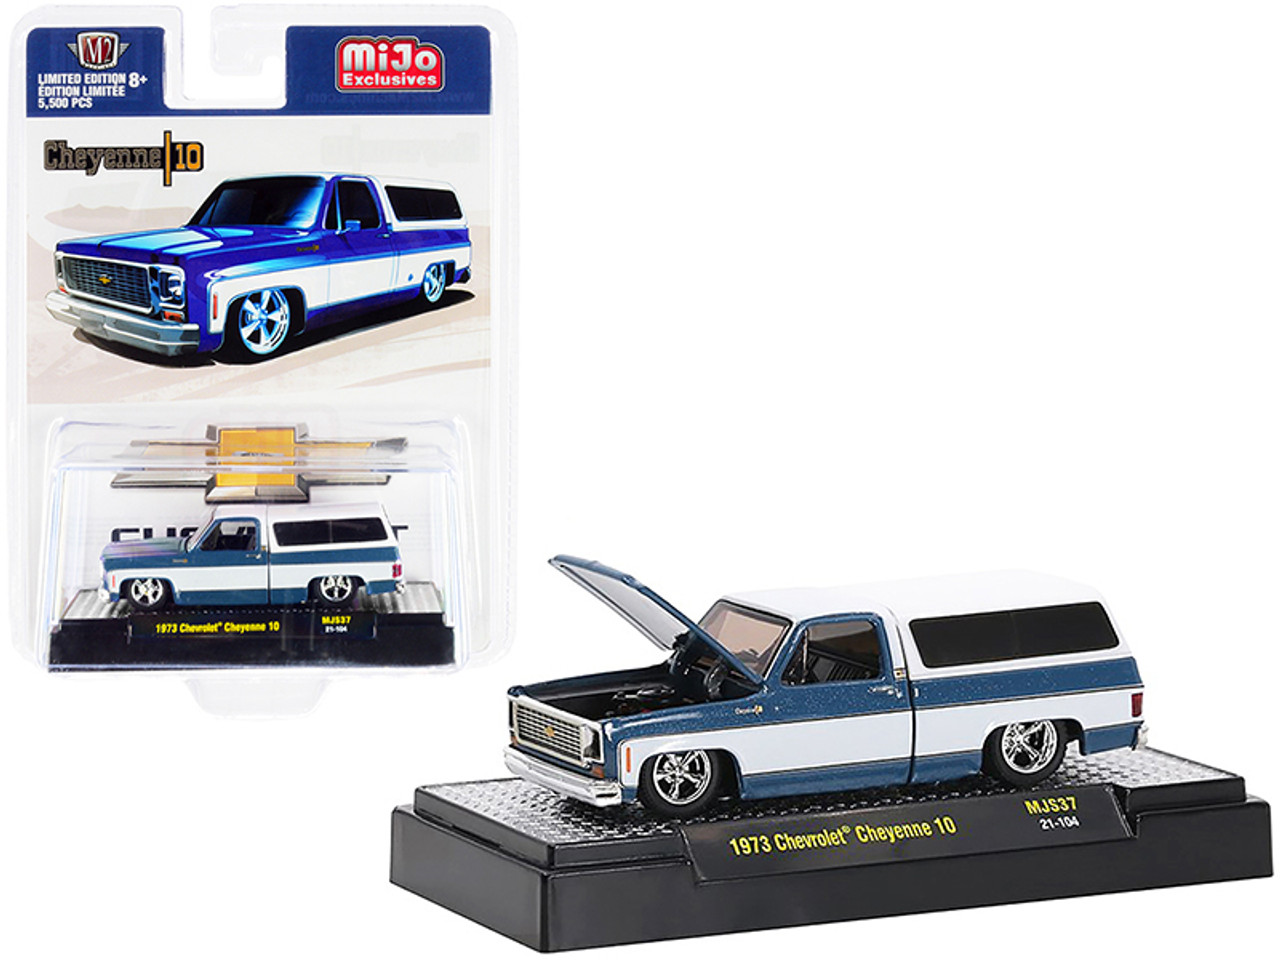 1973 Chevrolet Cheyenne 10 Pickup Truck with Camper Shell Blue and White Limited Edition to 5500 pieces Worldwide 1/64 Diecast Model Car by M2 Machines